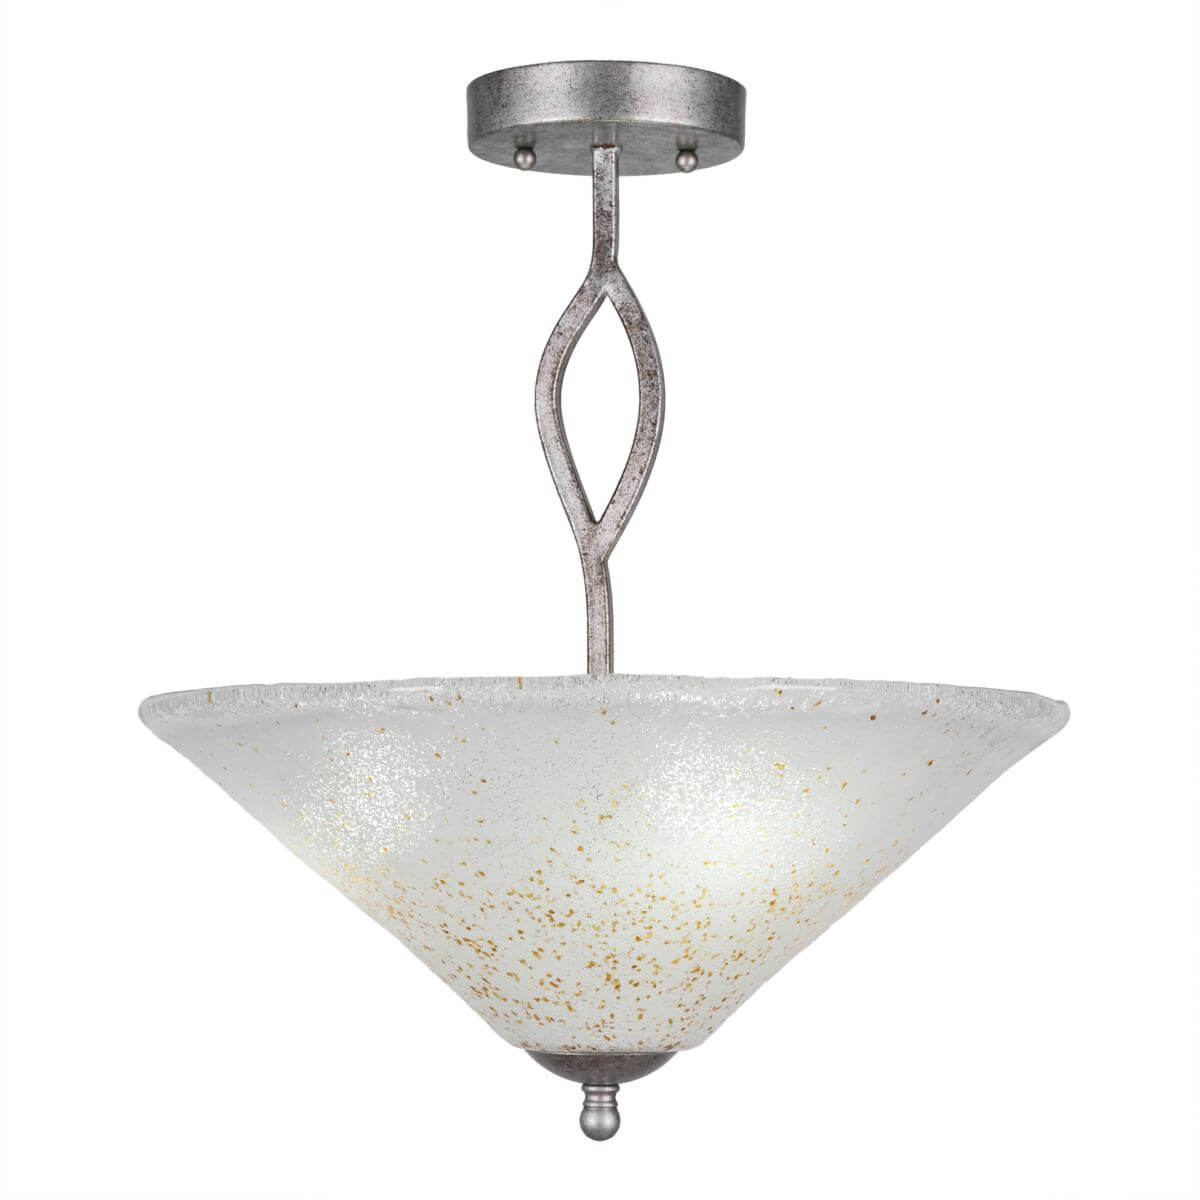 Toltec Lighting 242-AS-714 Revo 3 Light 16 inch Semi-Flush Mount in Aged Silver with 16 inch Gold Ice Glass